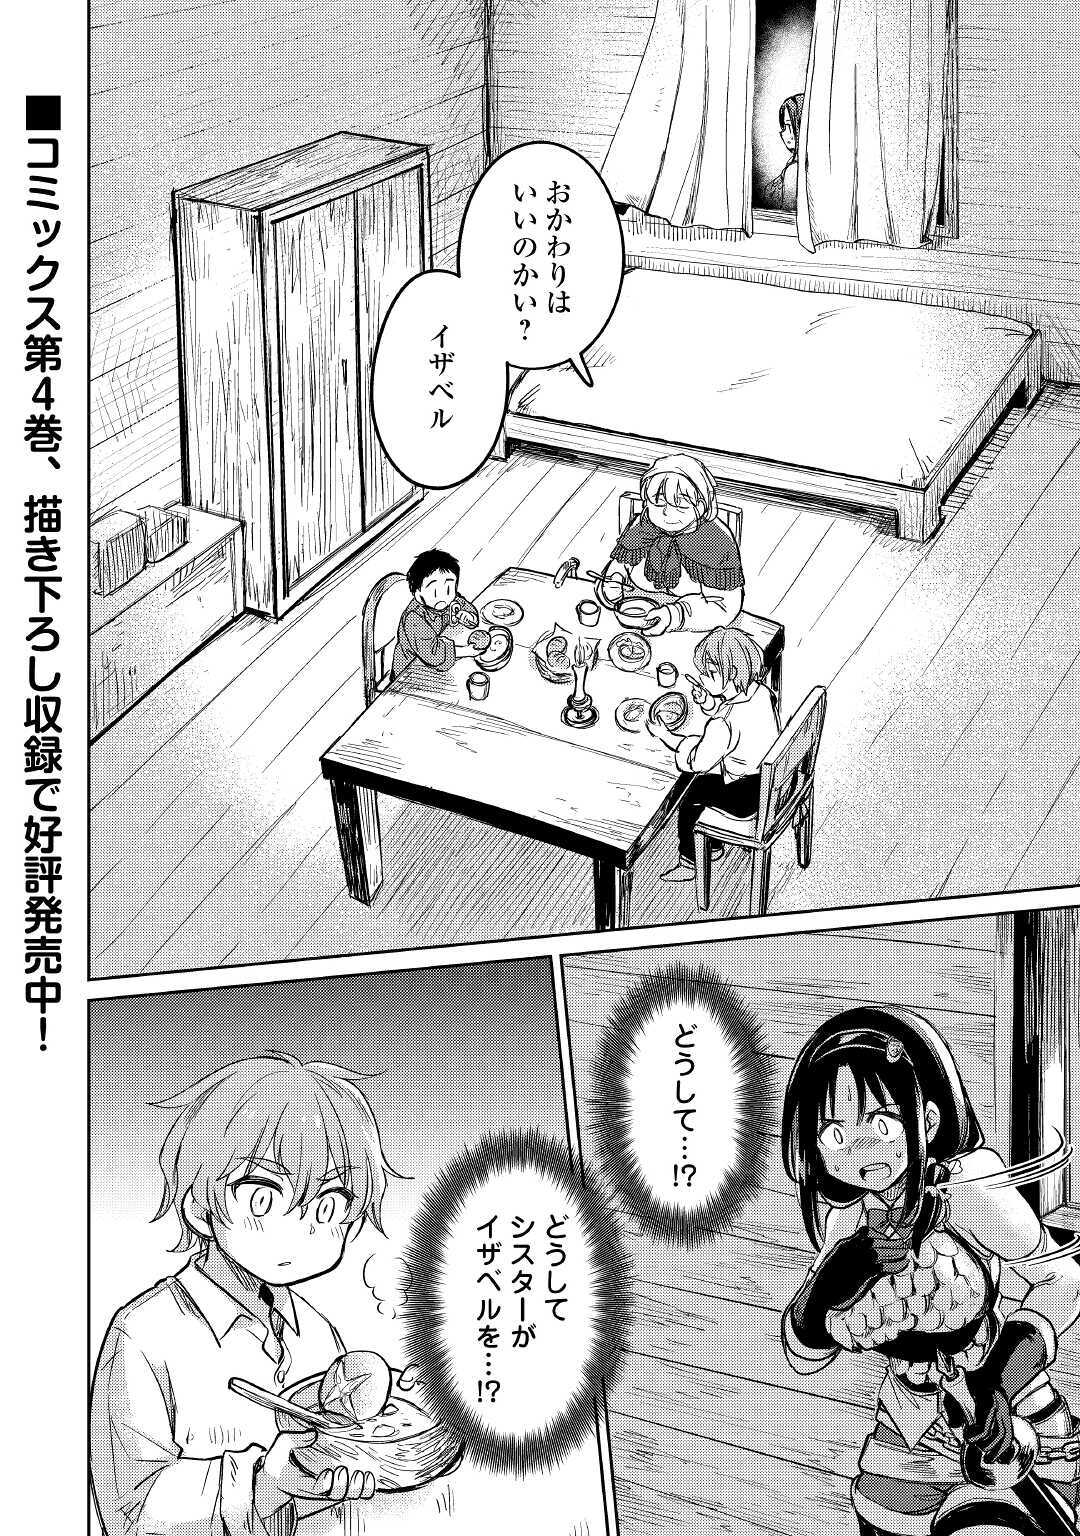 The Former Structural Researcher’s Story of Otherworldly Adventure 第31話 - Page 32